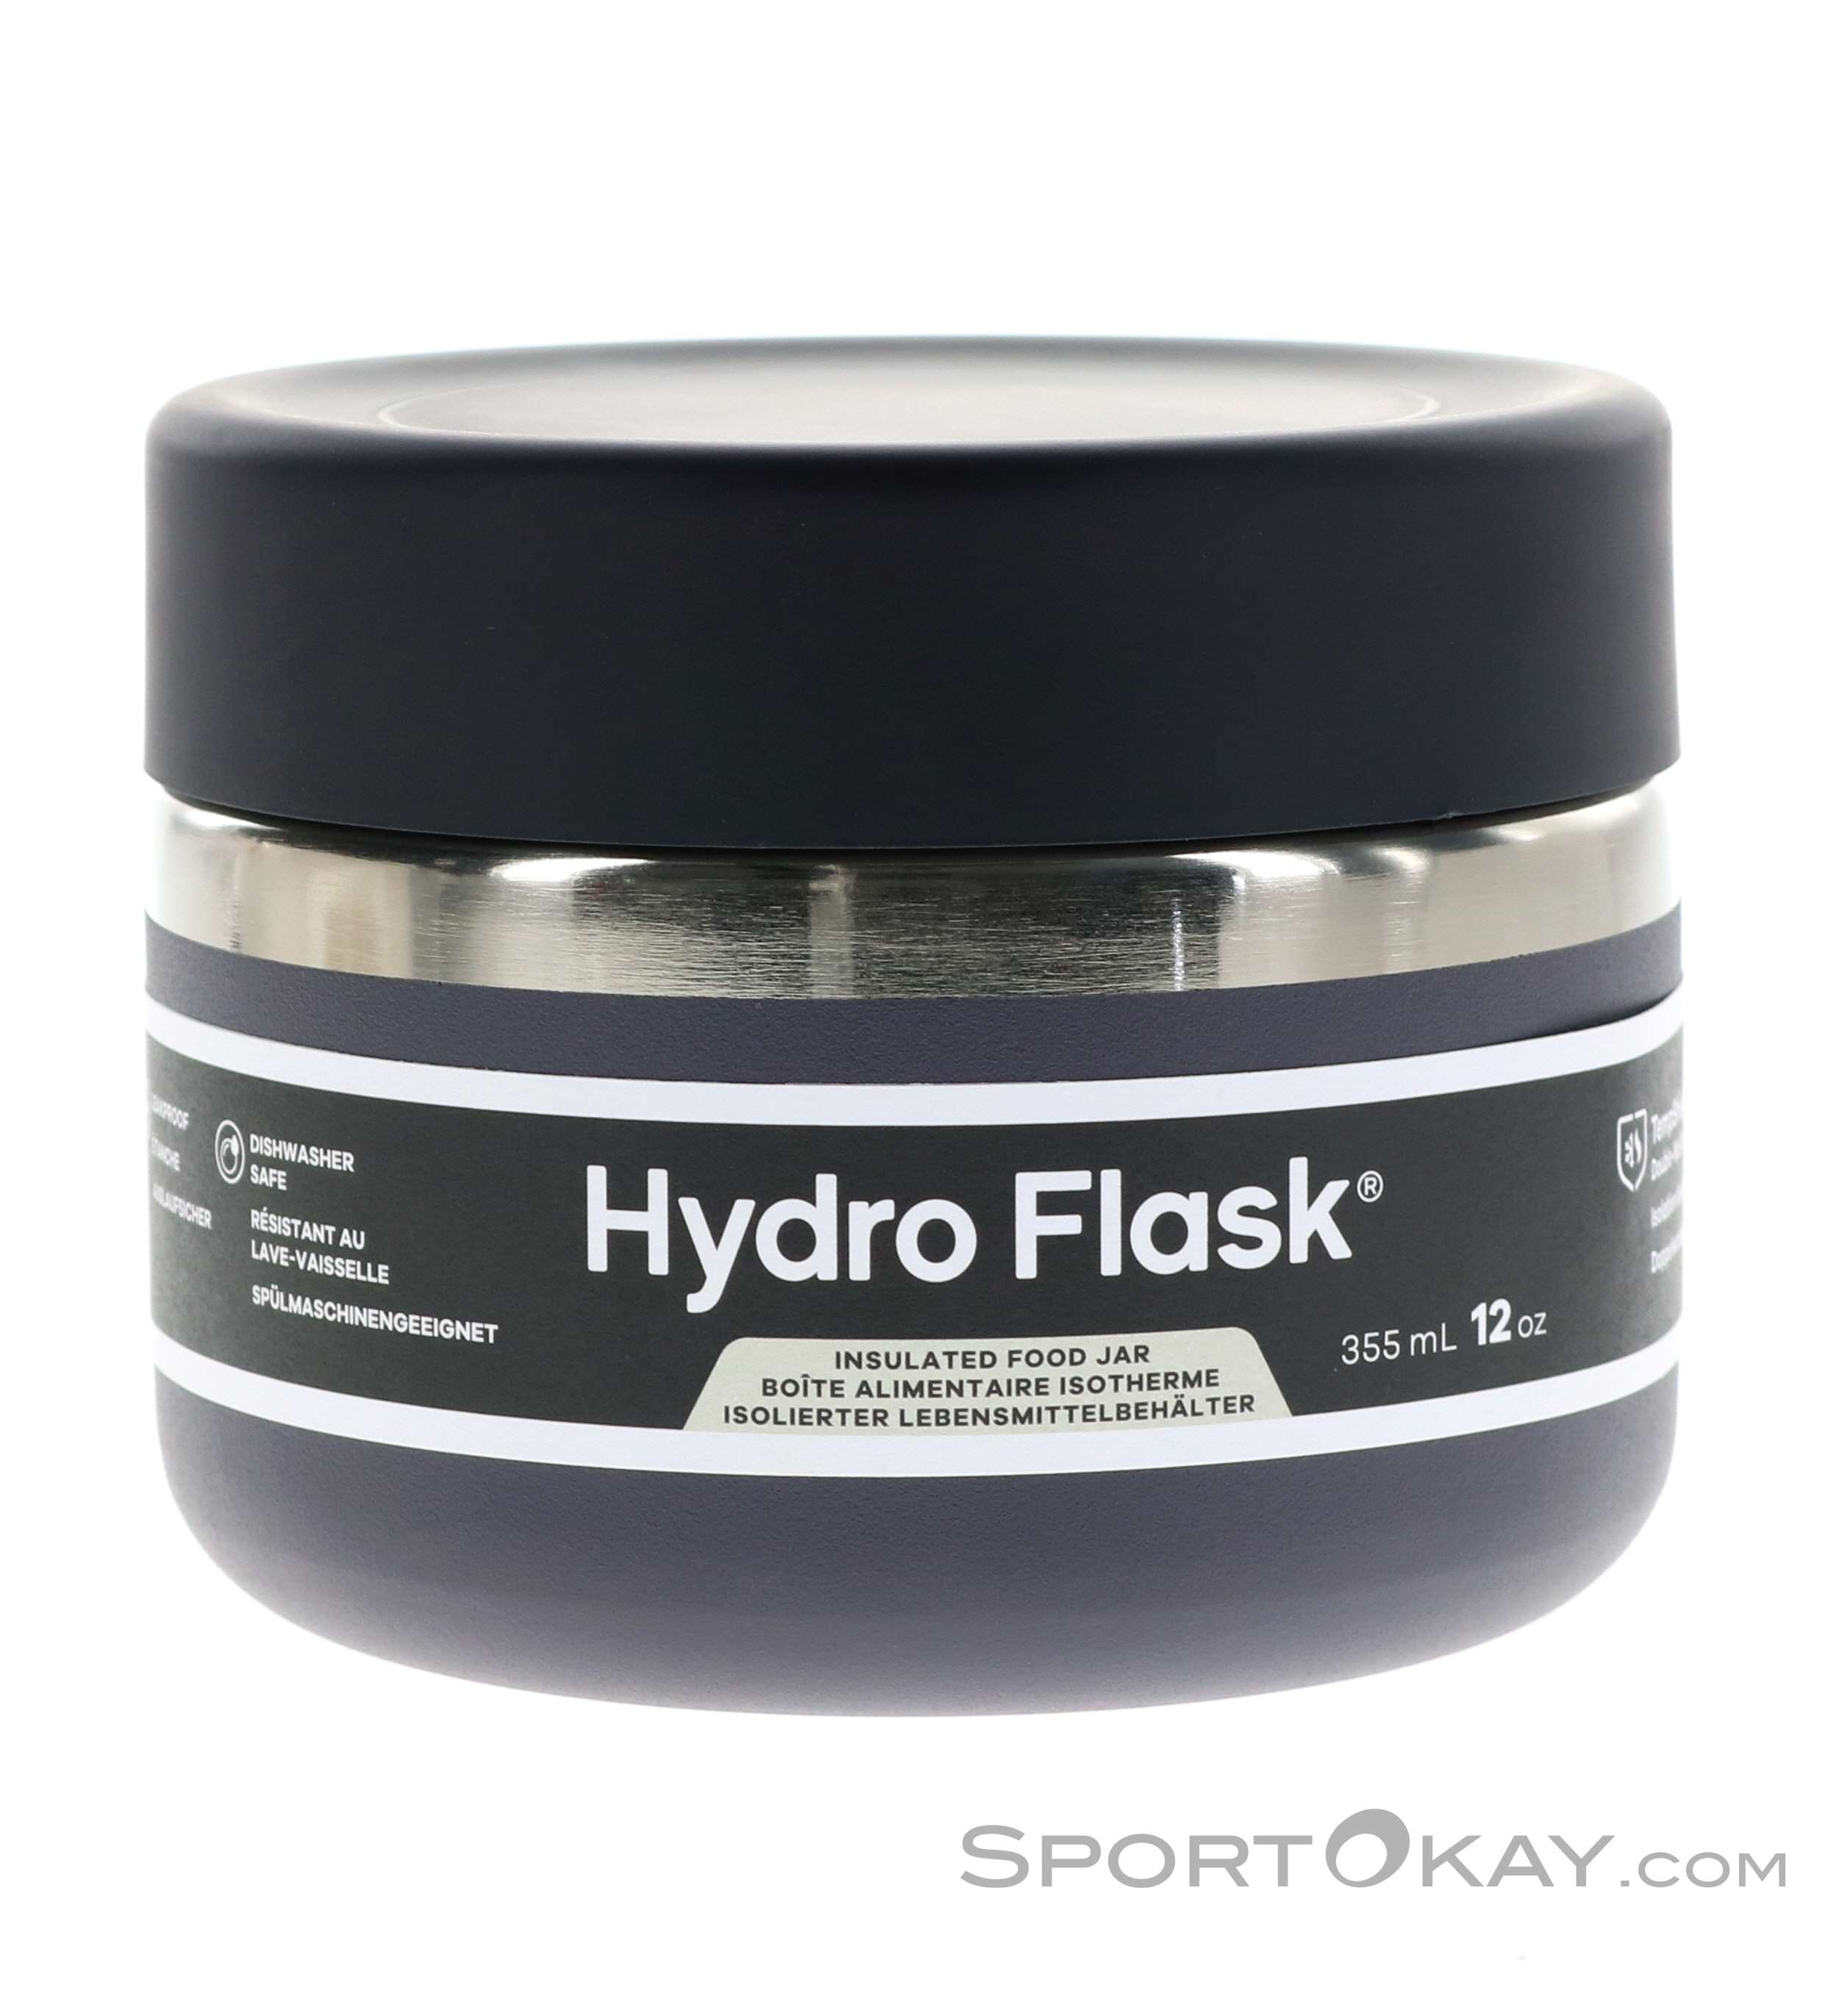 Hydro Flask 12oz Insulated Food Jar 355ml Food Container - Fitness